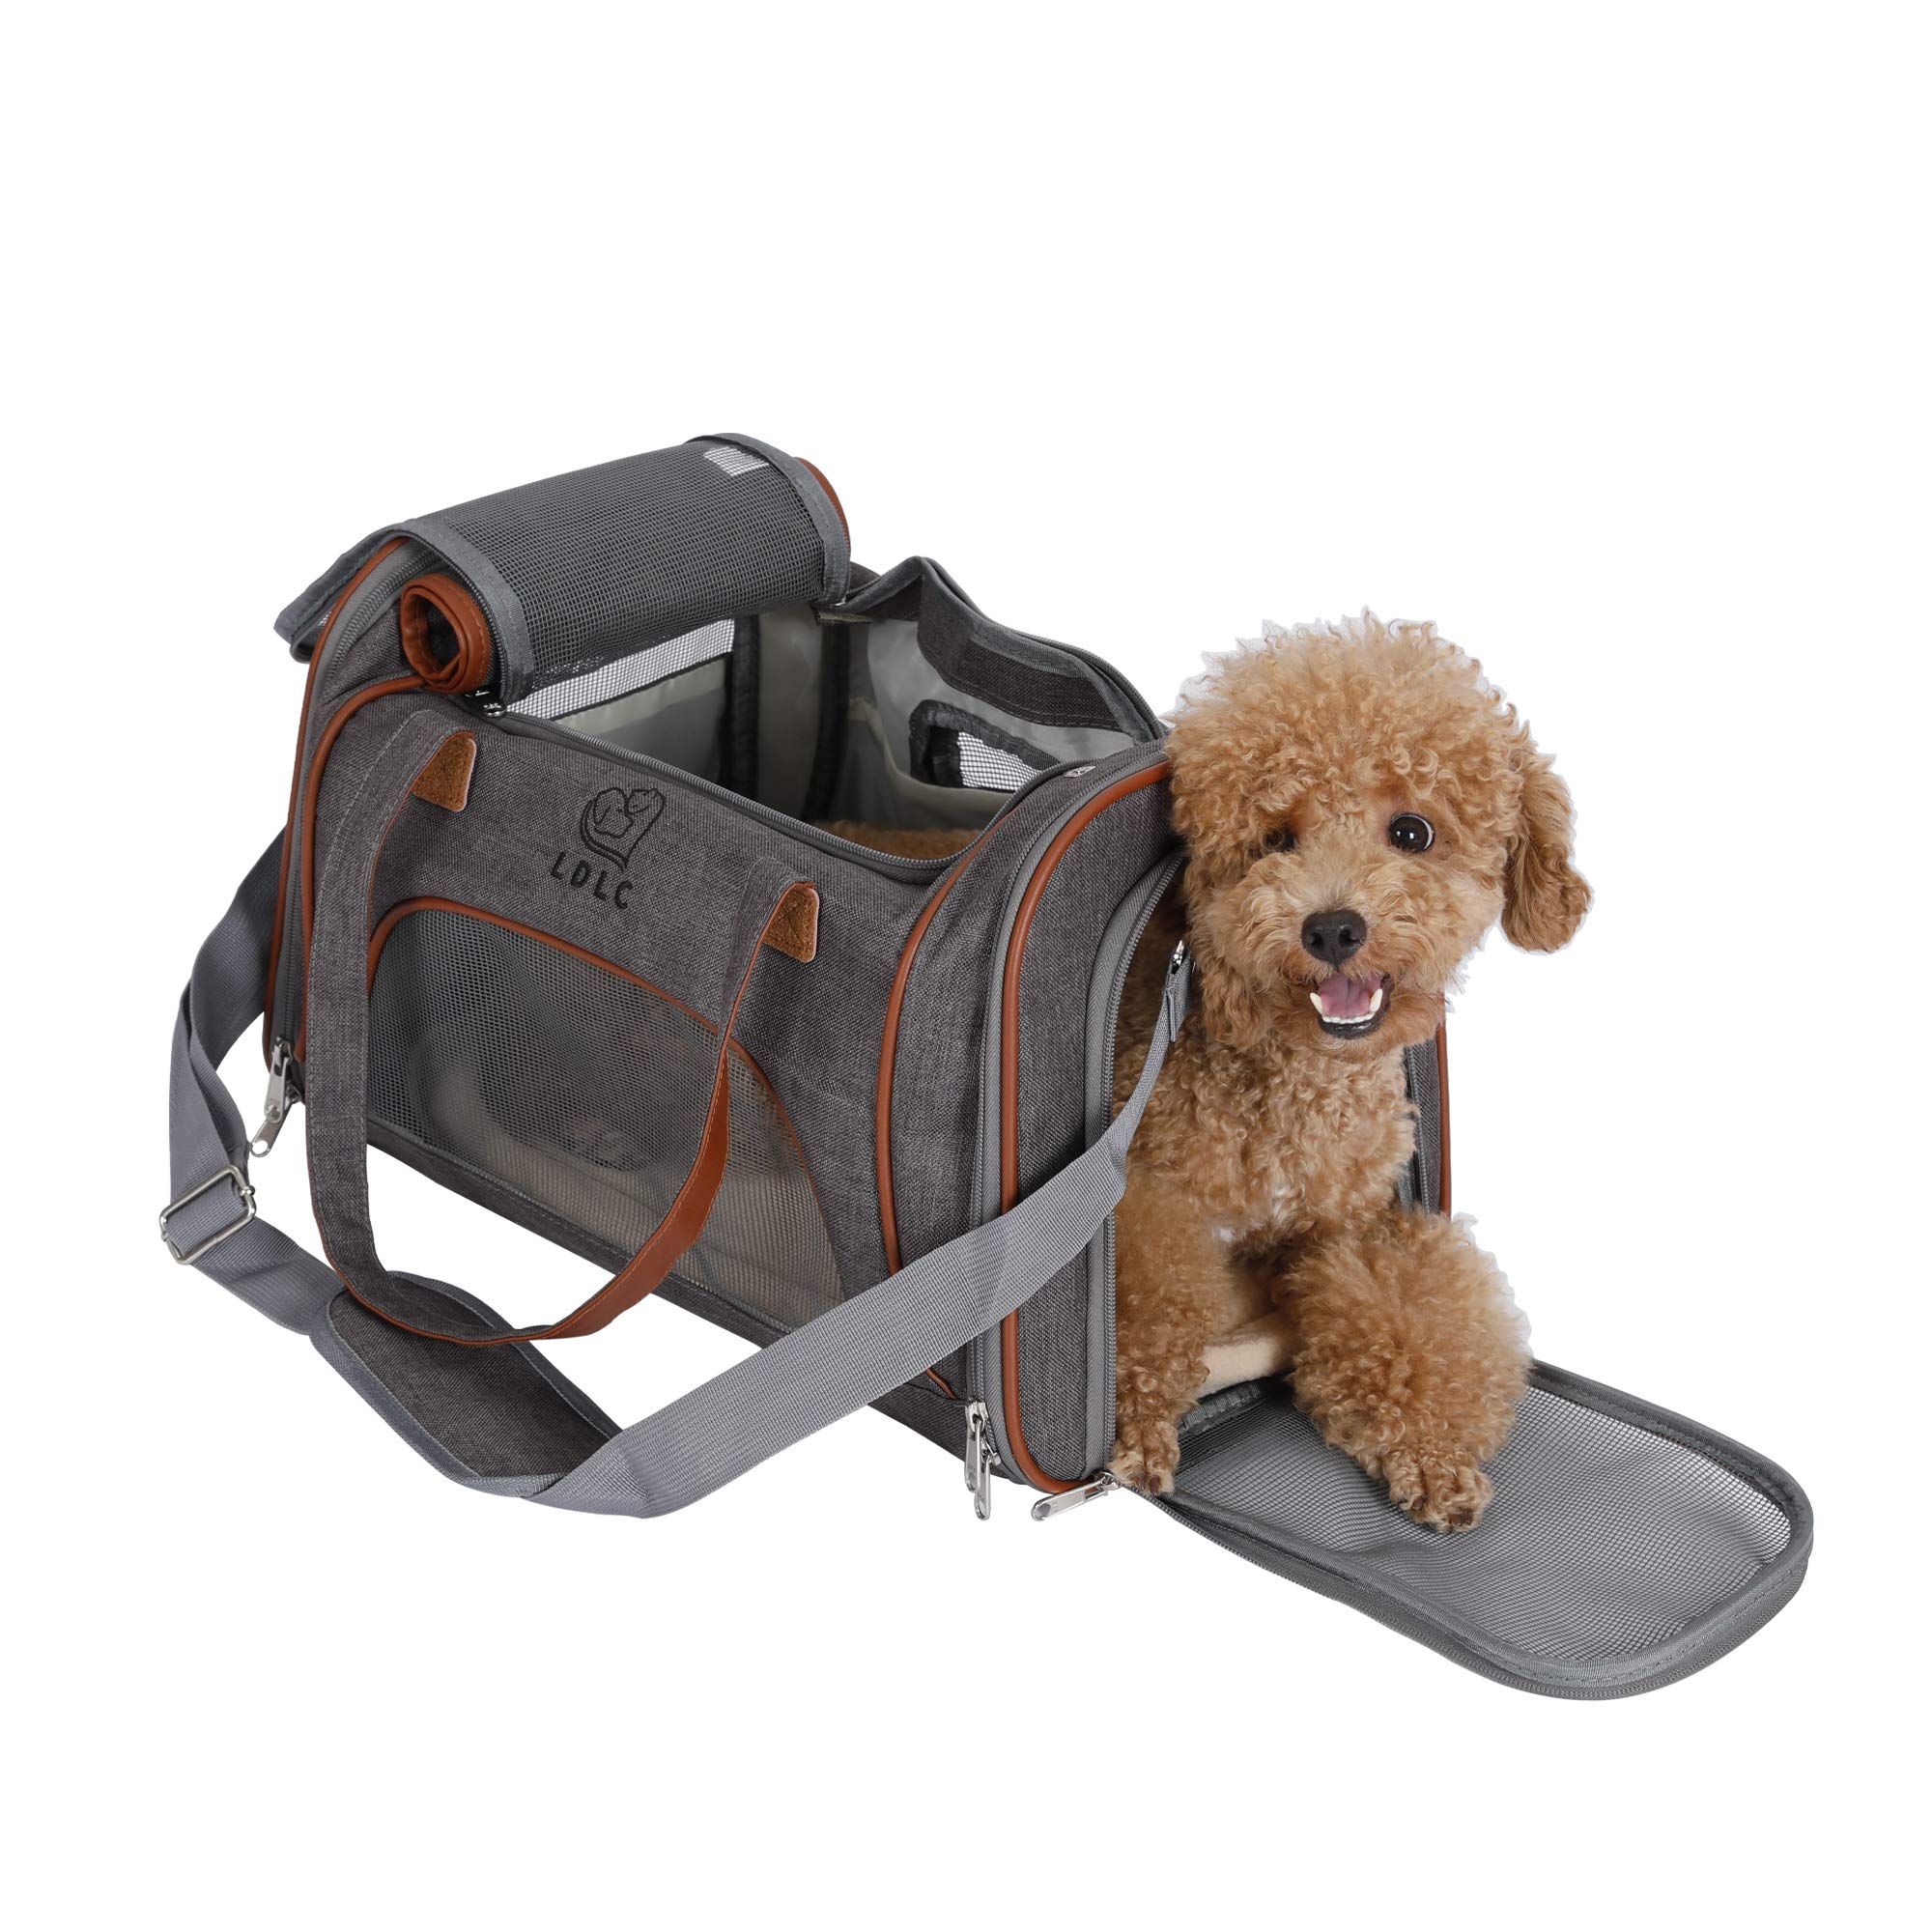 Cat Carrier Large Top Opening Pet Carriers for Small pets Airline Approved